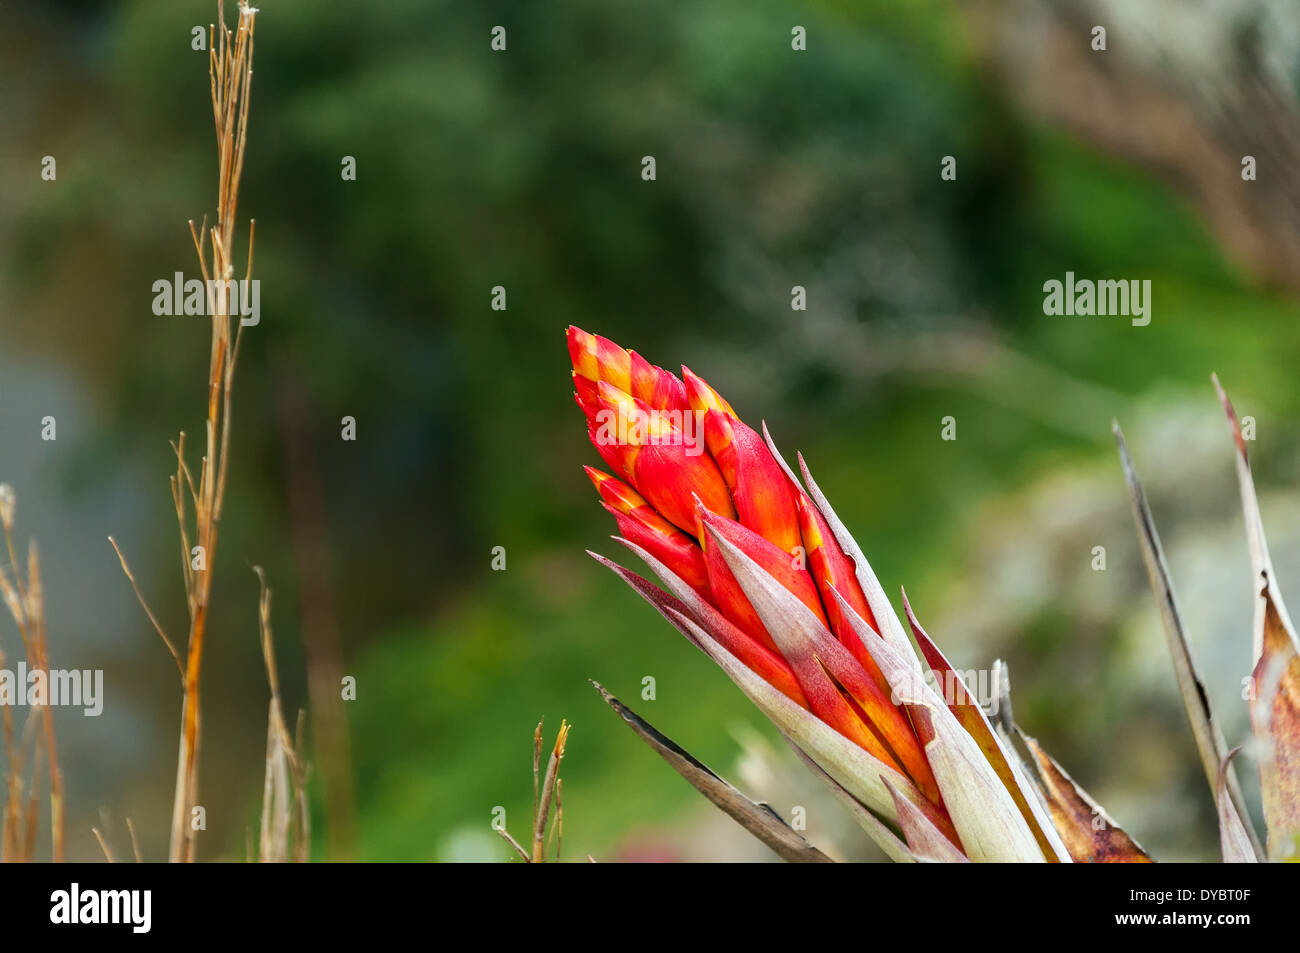 A red flower with an out of focus background near Suesca, Colombia Stock Photo